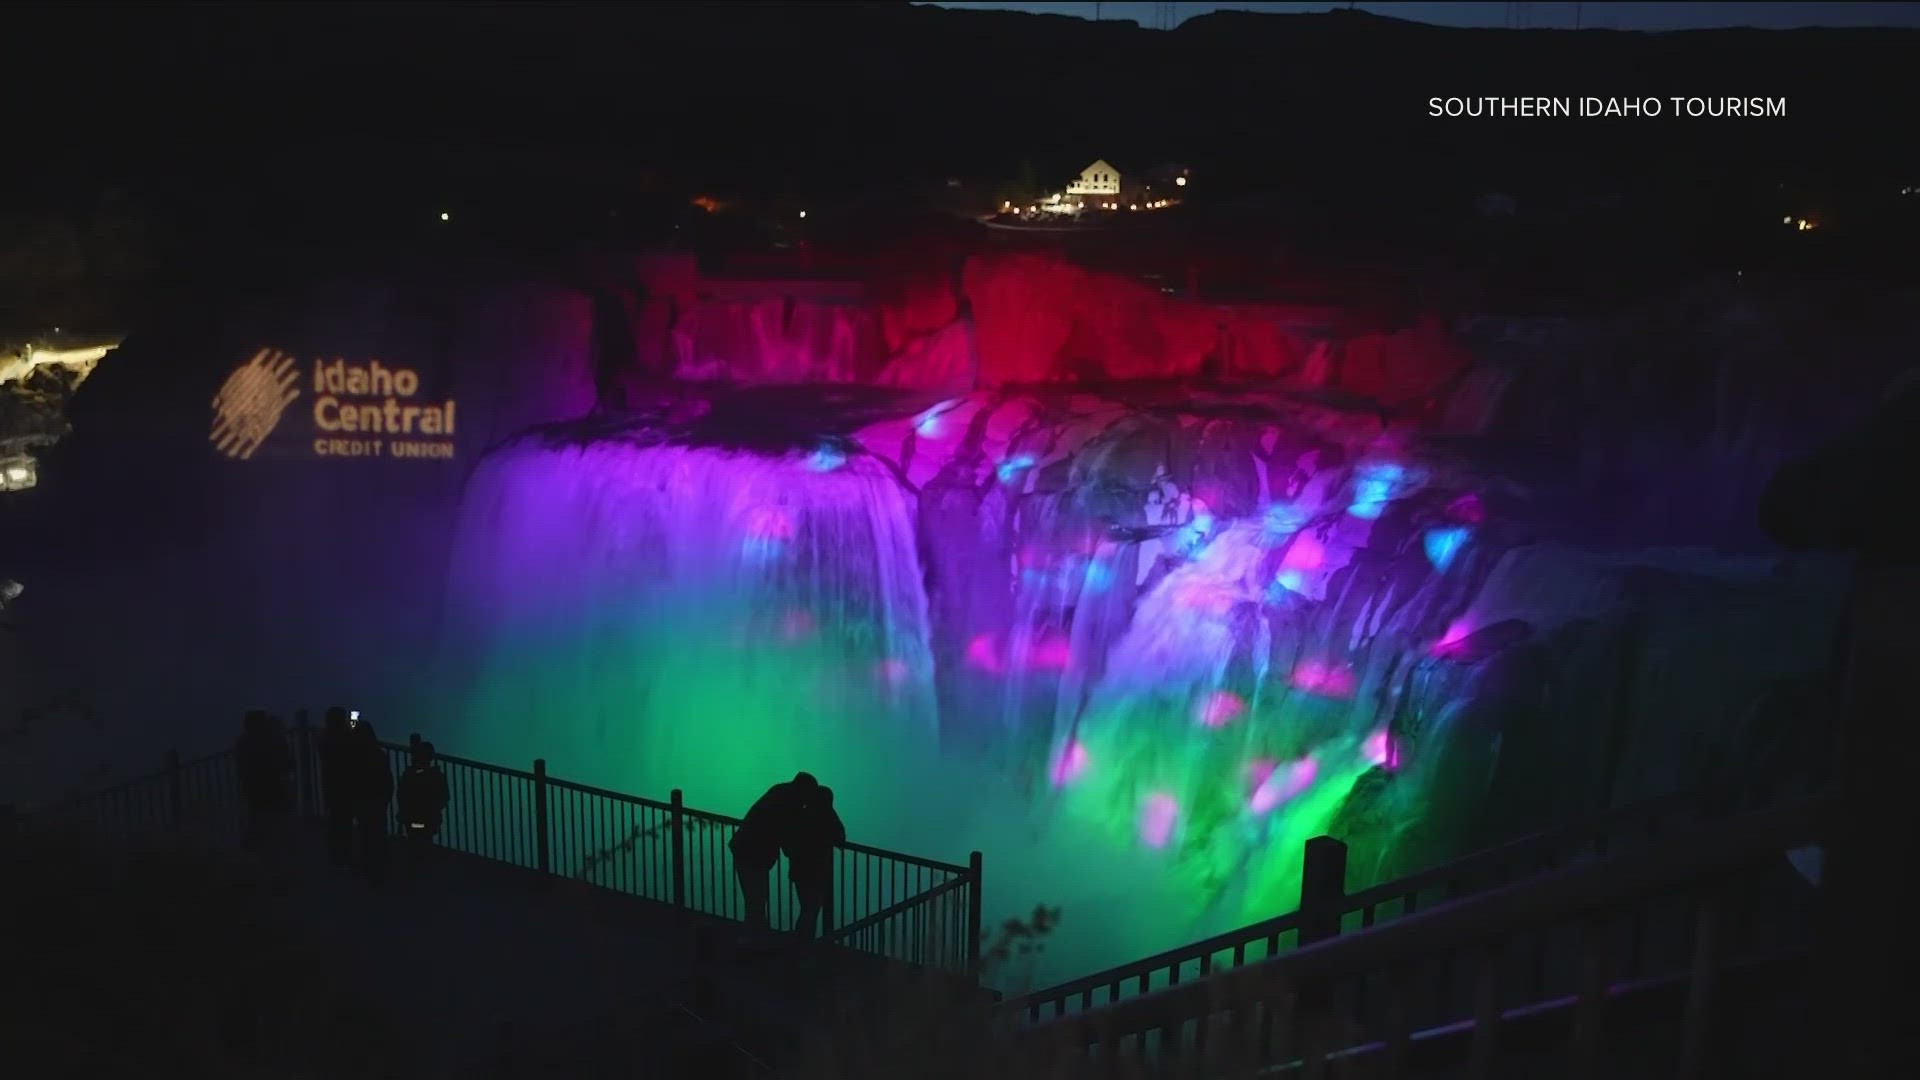 For the third-straight year, "one of Idaho's most beloved places" will be illuminated in stunning colors. Shoshone Falls After Dark returns April 27-30 and May 4-7.